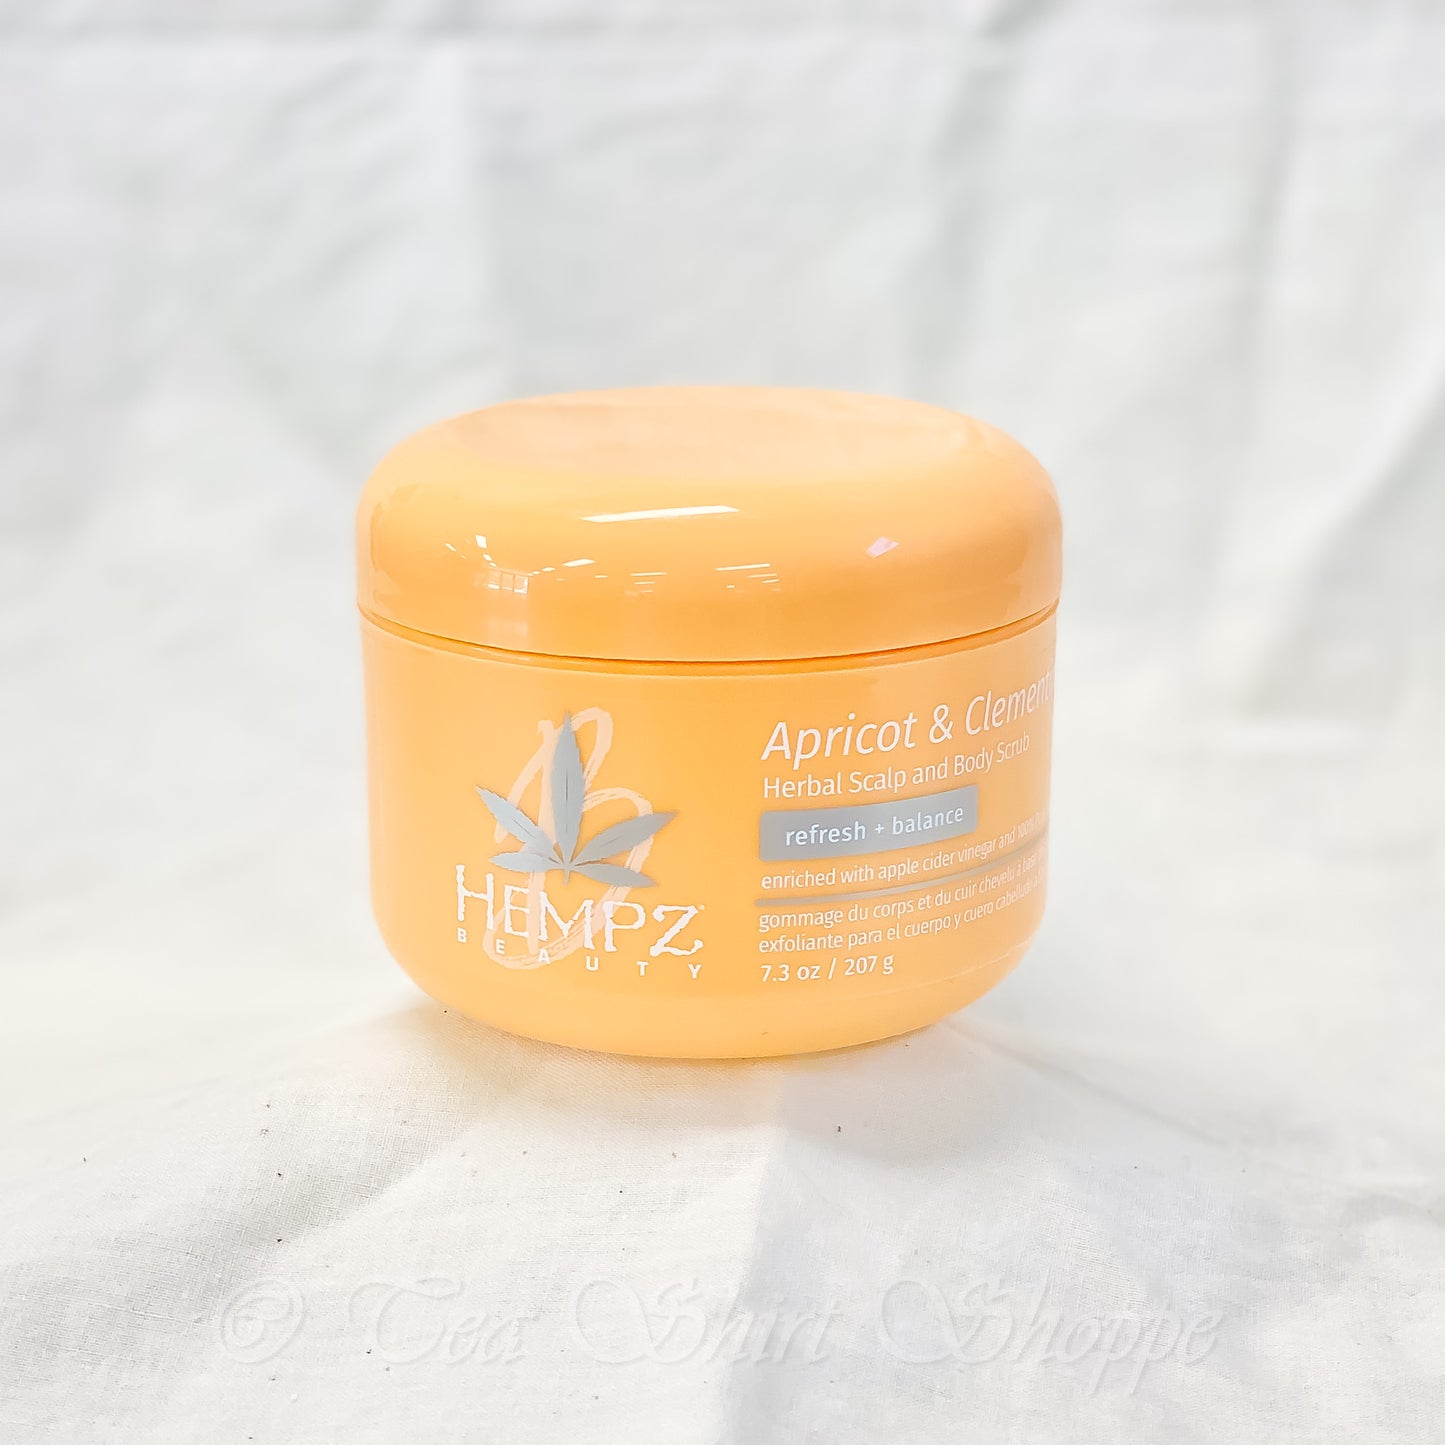 Benefits: • Helps balance and clarify scalp & skin by exfoliating dead skin cells • Creamy, gentle daily scrub that helps exfoliate and soften skin • Apple cider vinegar extract provides a boost of Vitamin C making the skin appear brighter and refreshed